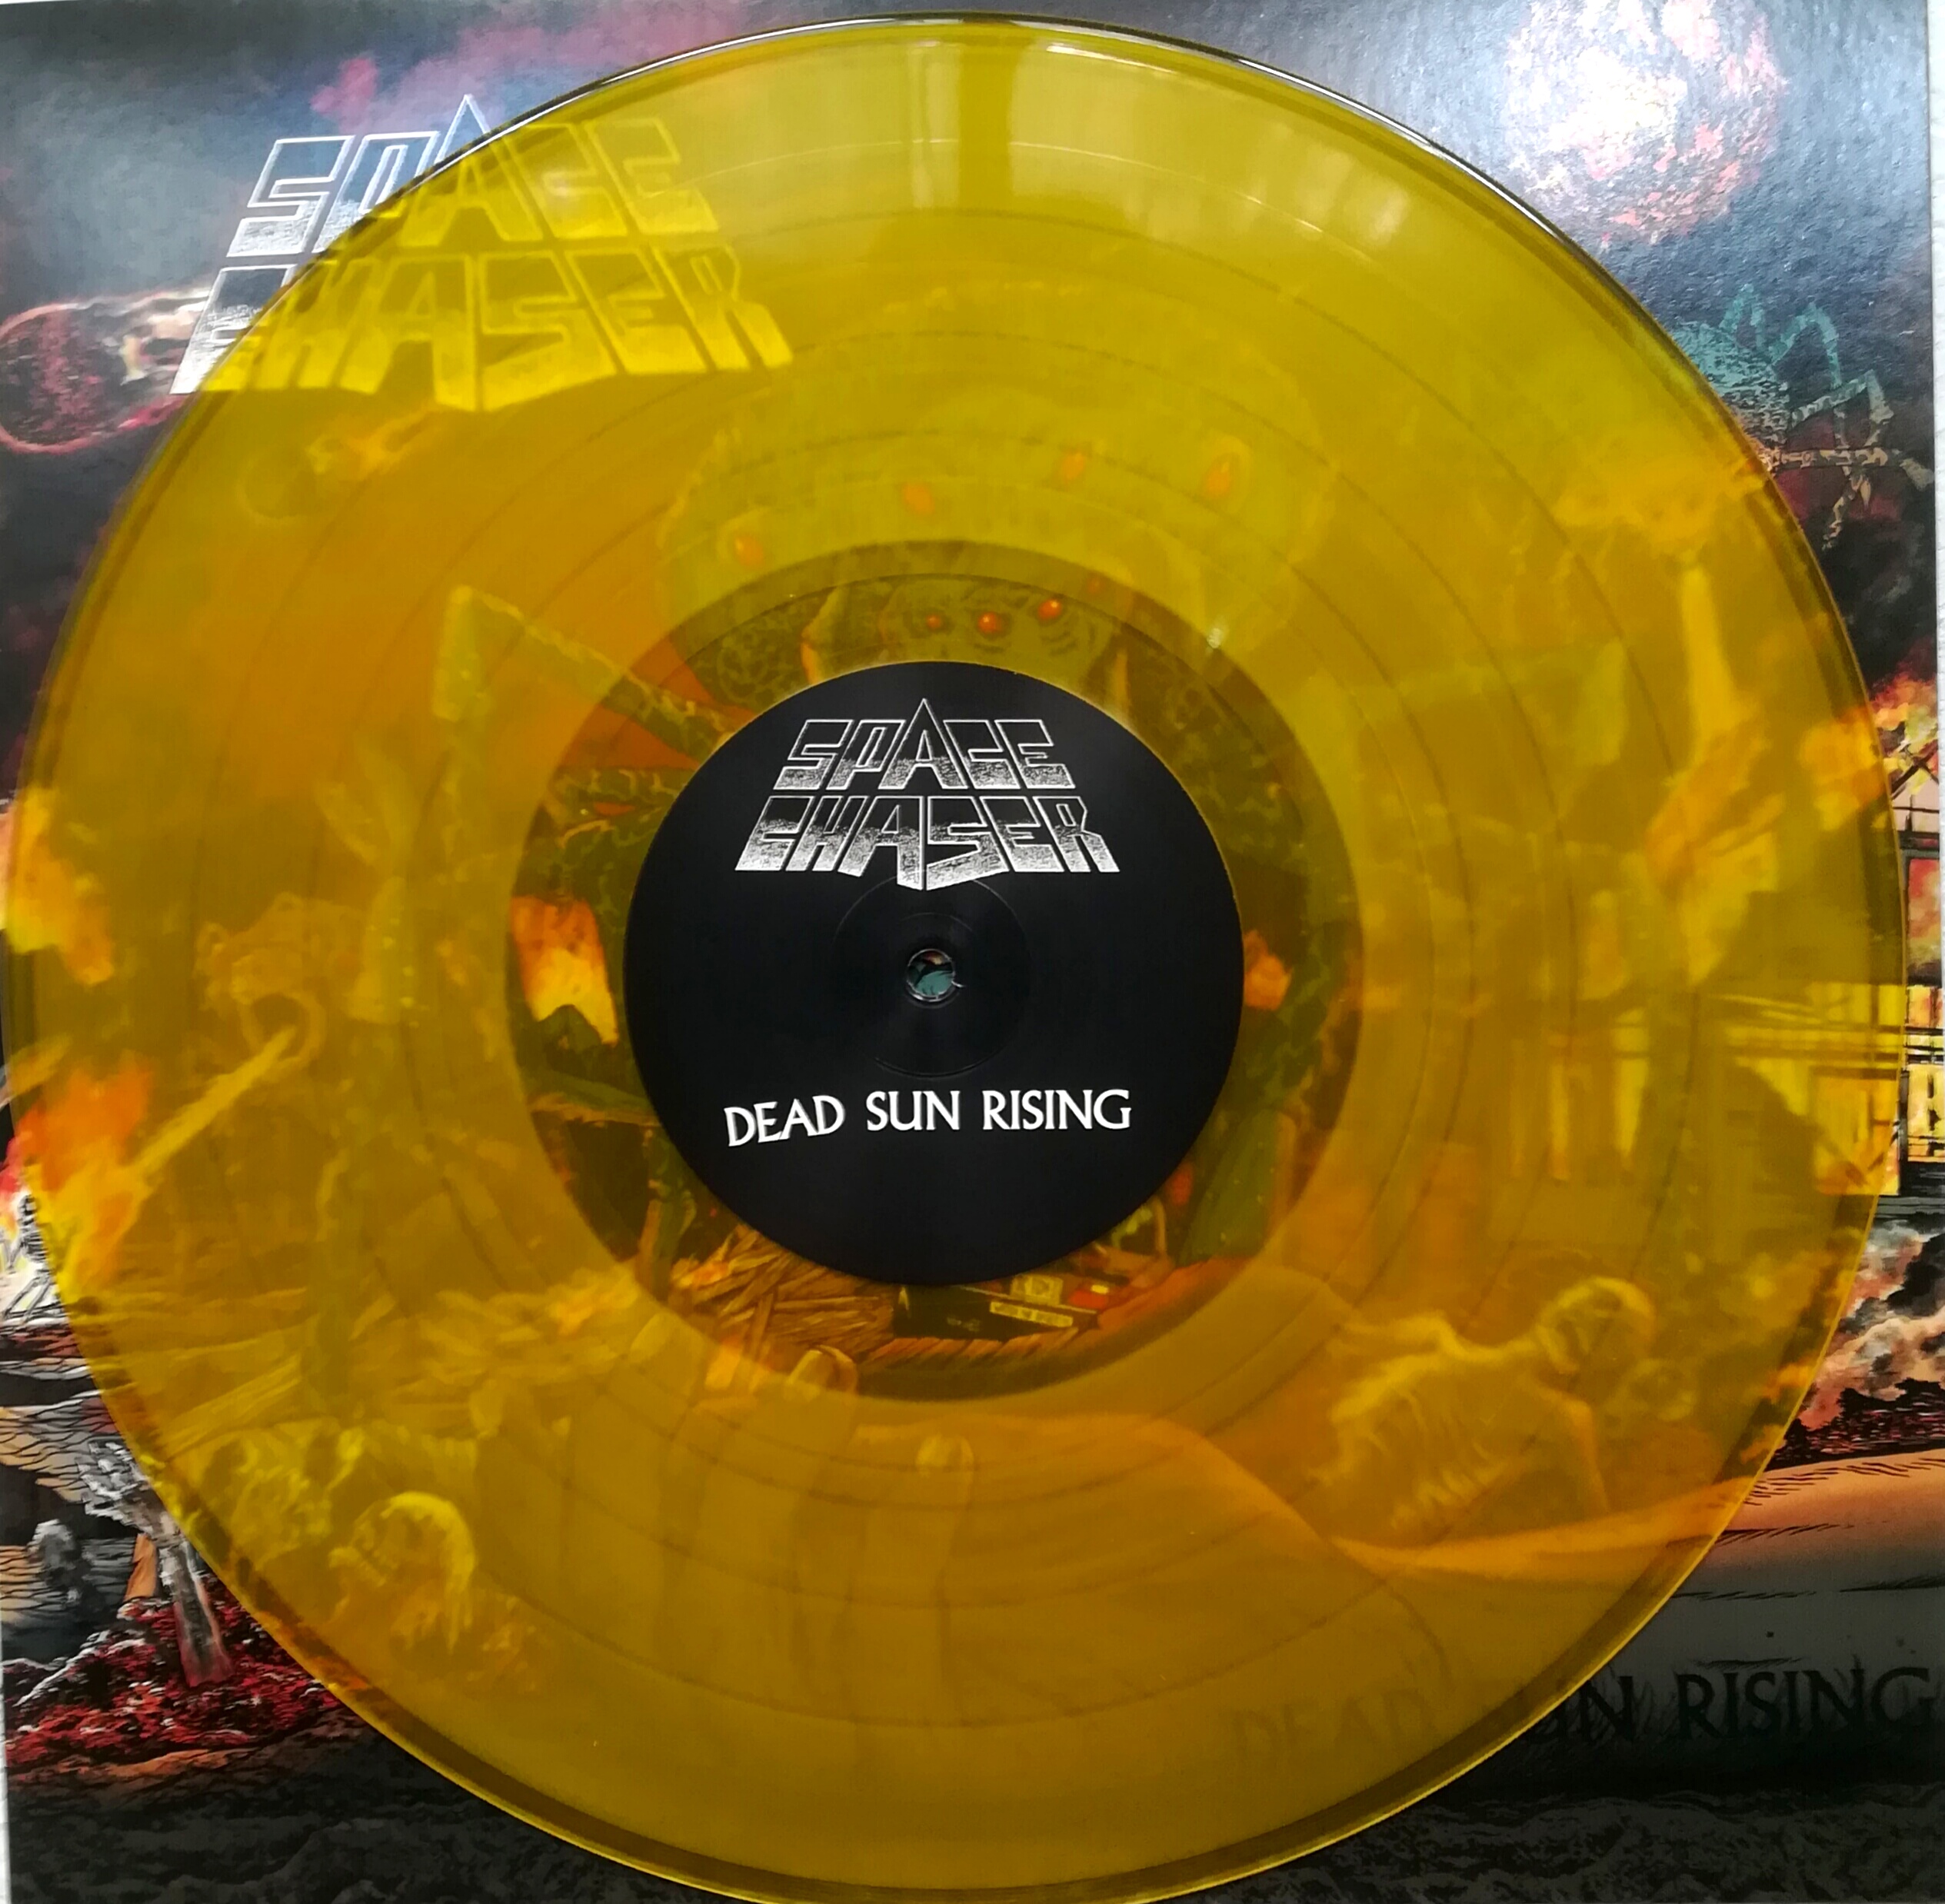 Space Chaser - Dead Sun Rising col.LP/CD Pressing Info: 1st press: 150x blood red, 600x black (Sold Out) 2nd press: 500x clear brown marbled (Sold Out) 3rd press: 150x solid orange marbled & 150x transparent yellow vinyl comes with downloadcode, CD version in jewelcase